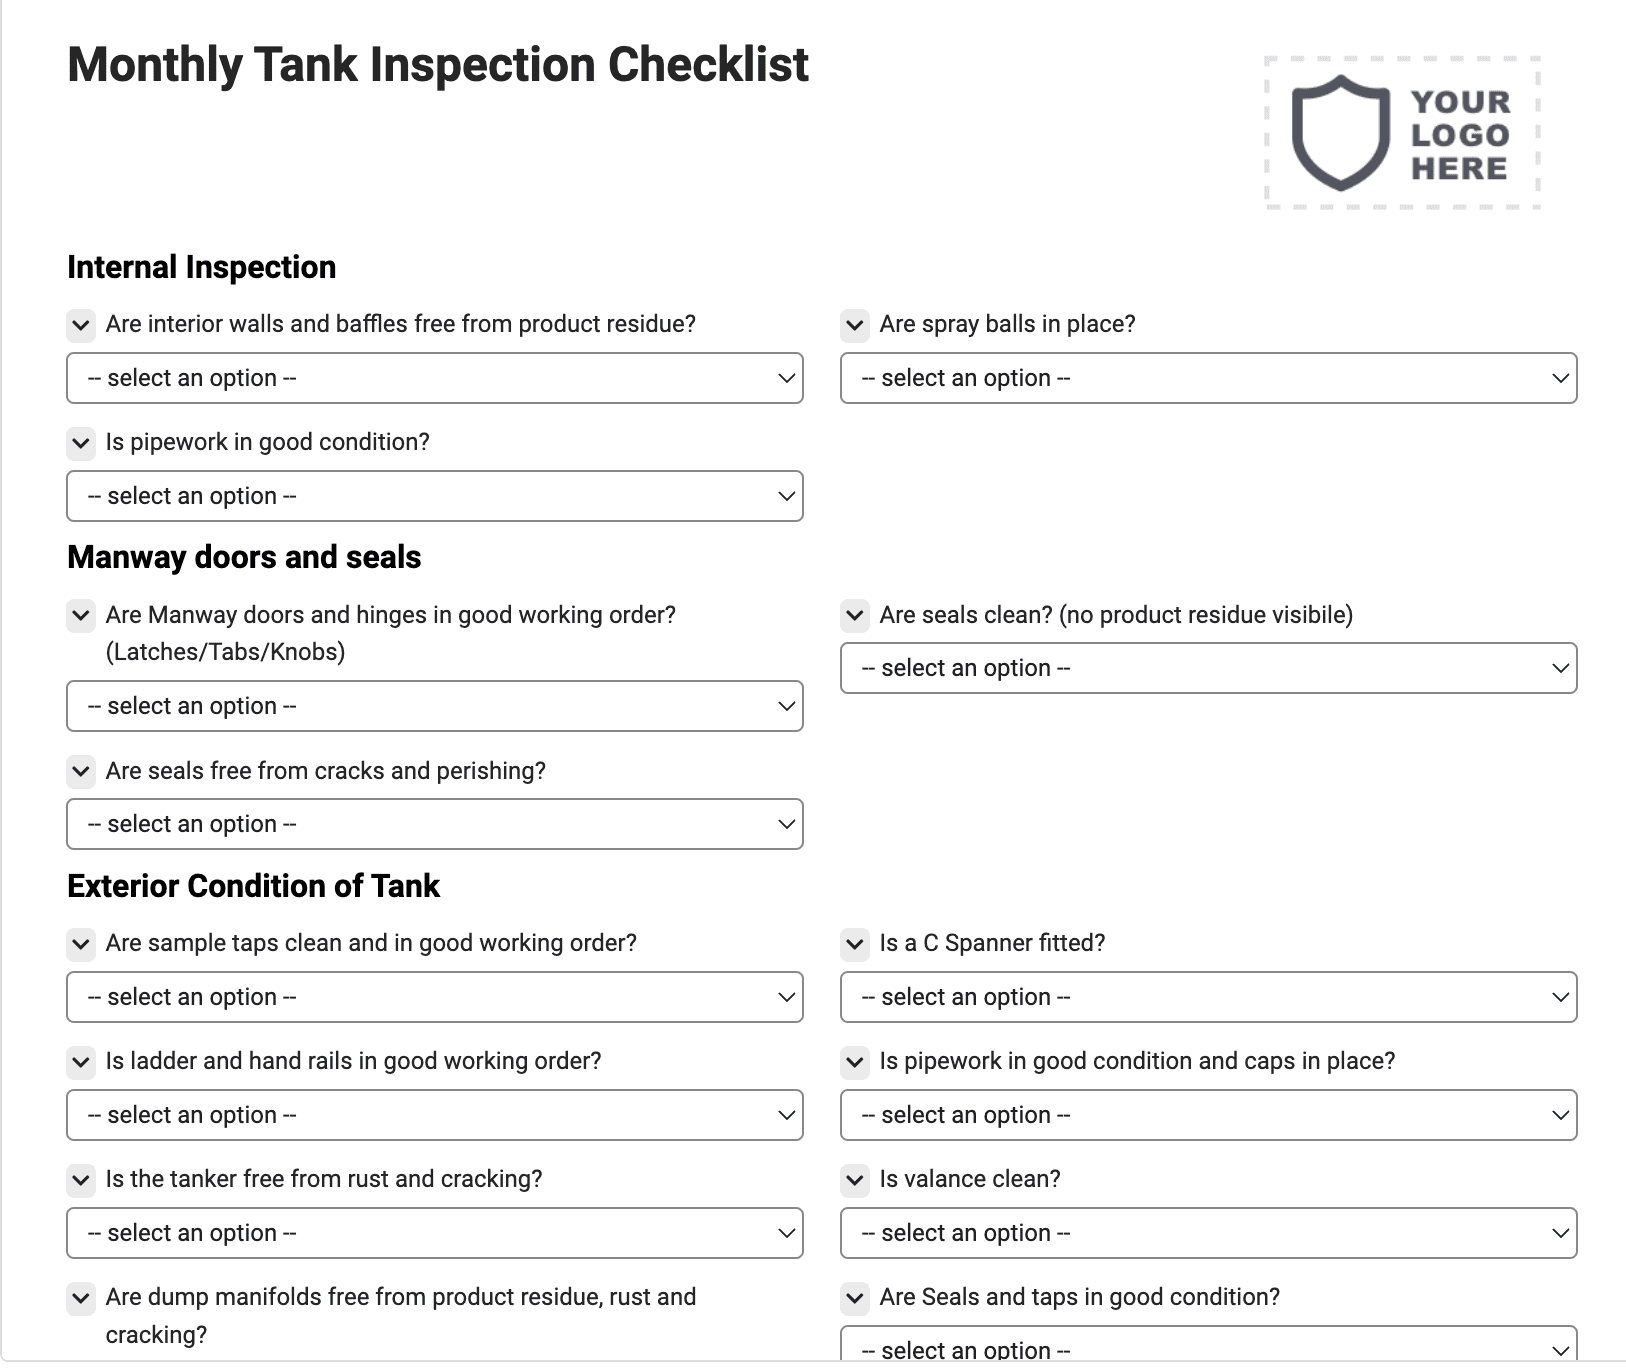 Monthly Tank Inspection Checklist